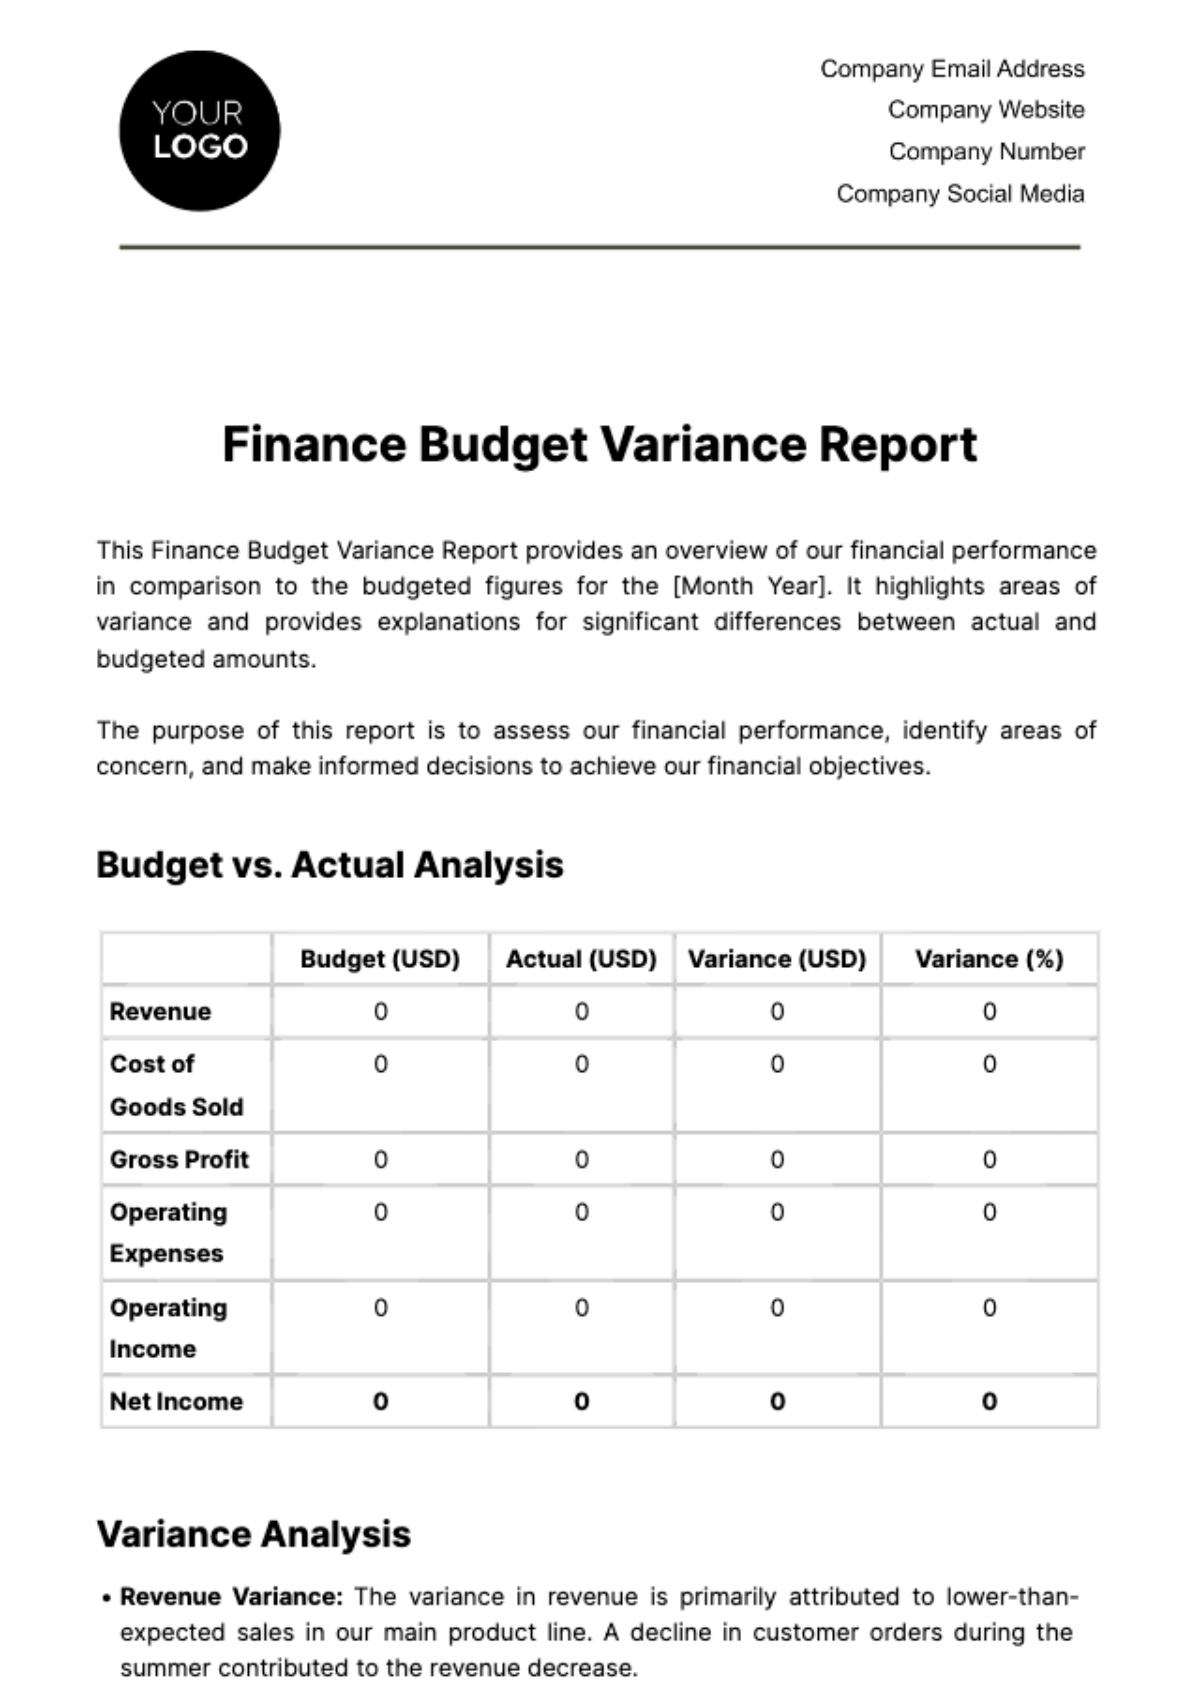 Free Finance Budget Variance Report Template